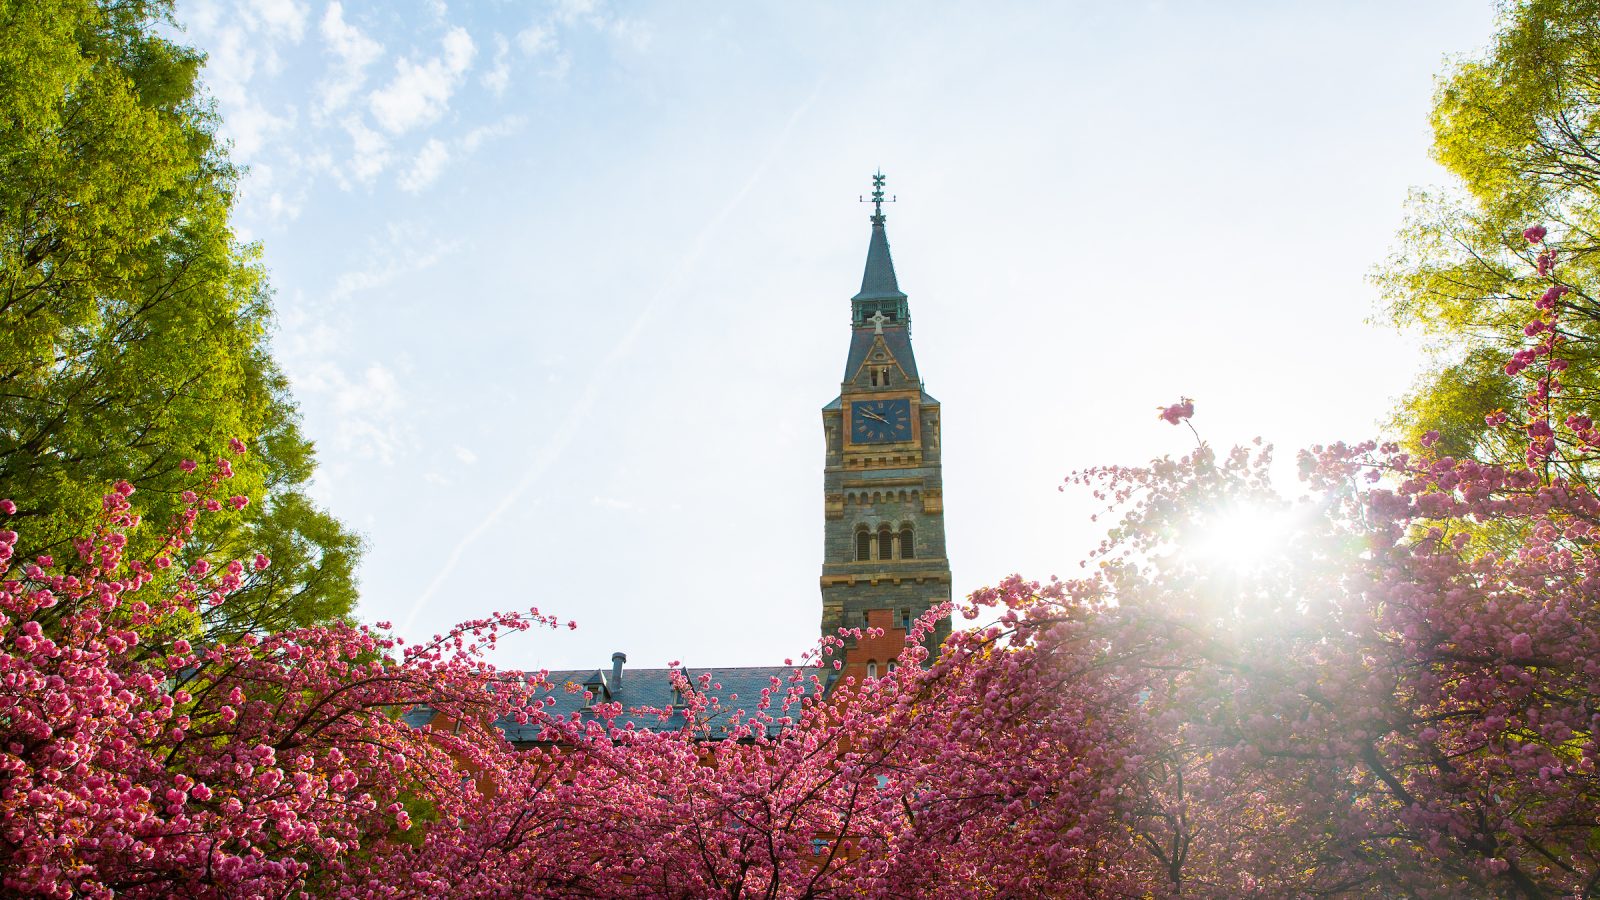 Sun shines behind trees blooming with flowers in front of a tall clock tower